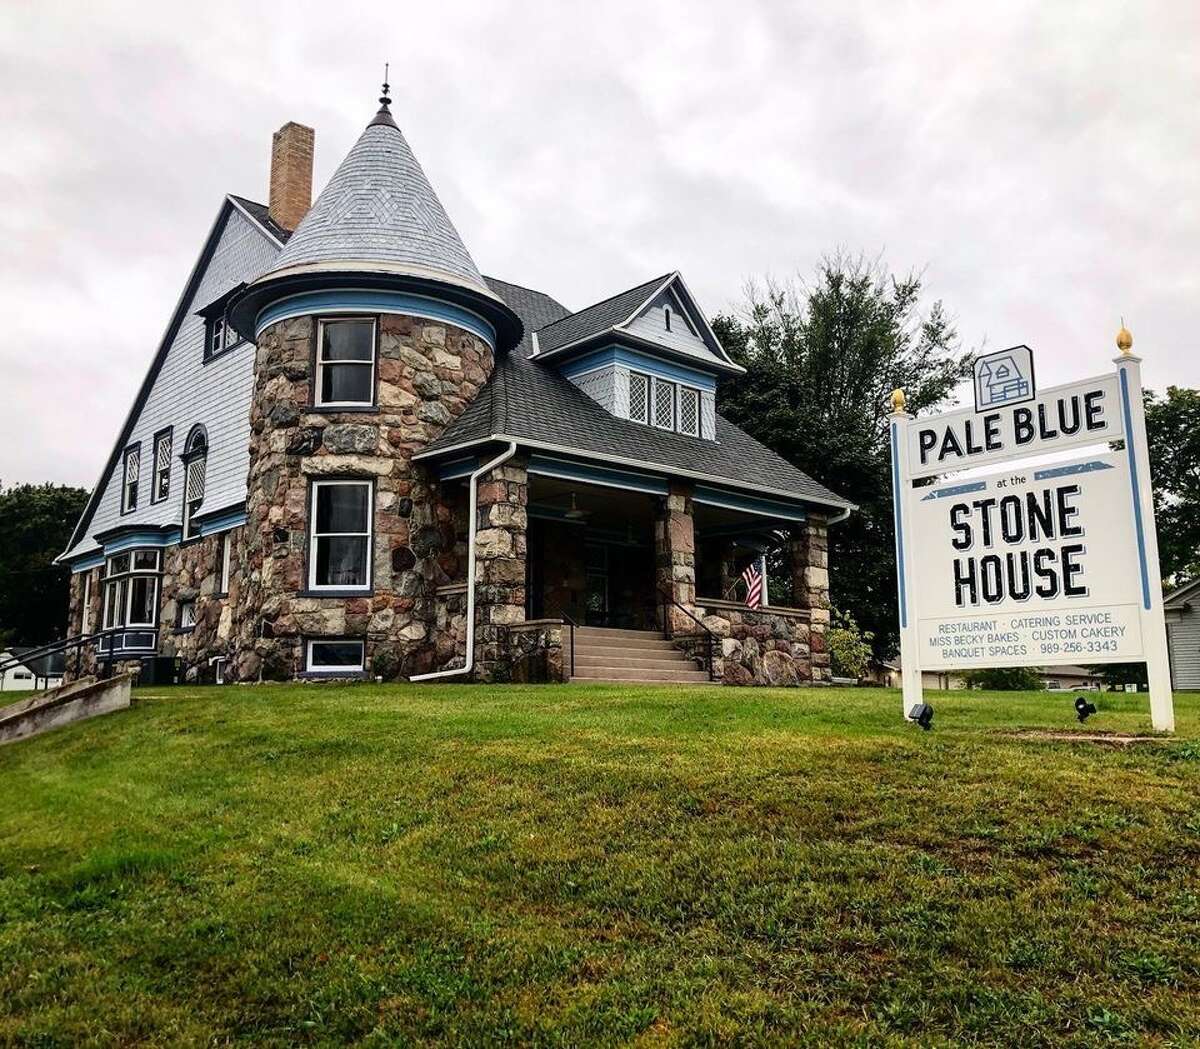 A view of Pale Blue at the Stone House located at 500 W. Cedar Avenue in Gladwin, Michigan